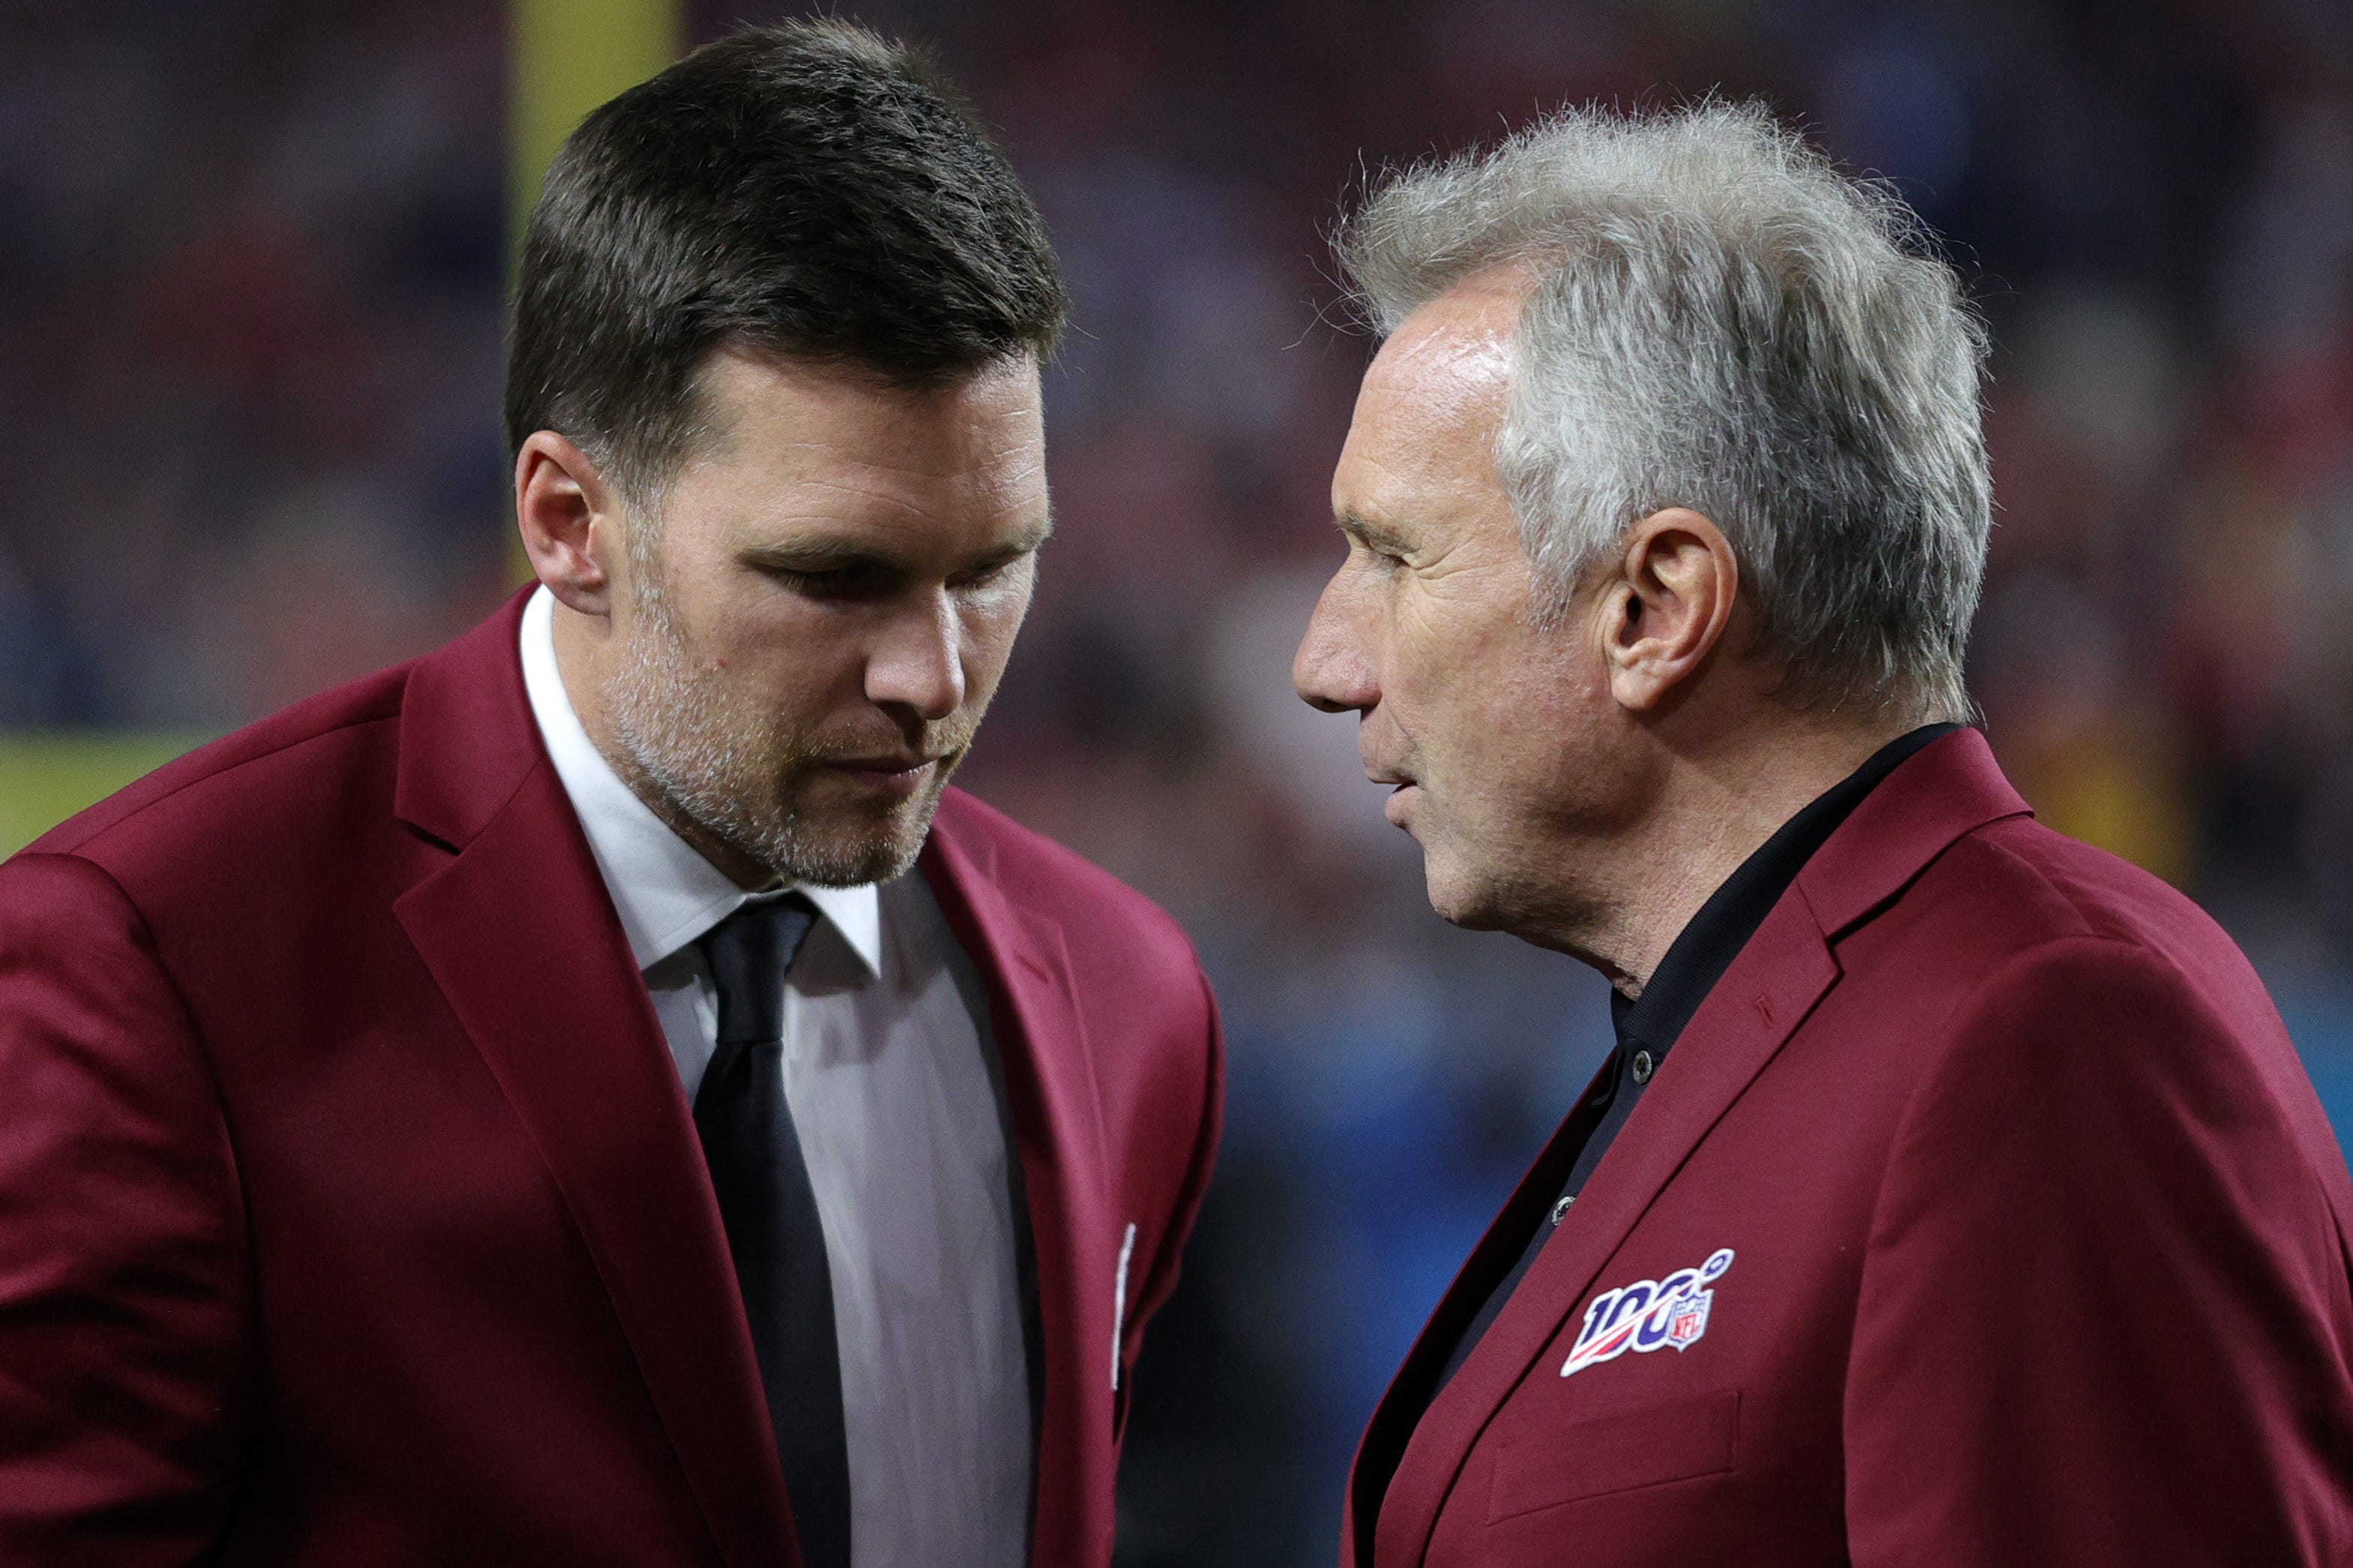  Joe Montana profile indicates that he's bothered by Brady's success 